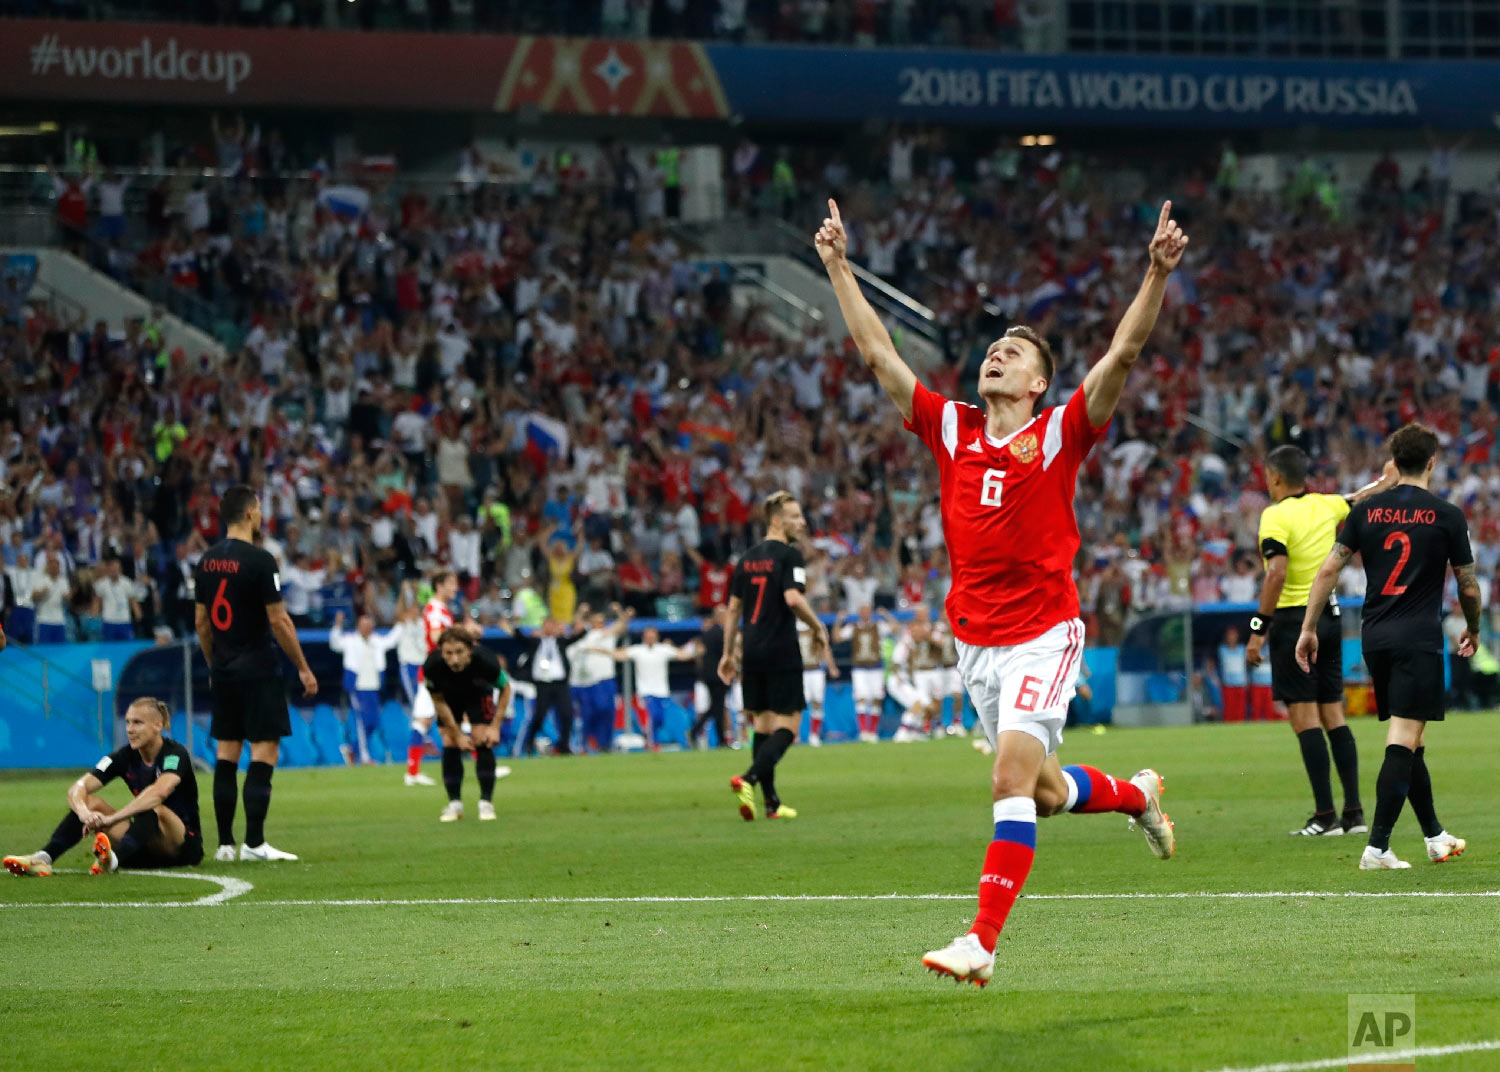  Russia's Denis Cheryshev celebrates after scoring his side's first goal during the quarterfinal match between Russia and Croatia at the 2018 soccer World Cup in the Fisht Stadium, in Sochi, Russia, Saturday, July 7, 2018. (AP Photo/Pavel Golovkin) 